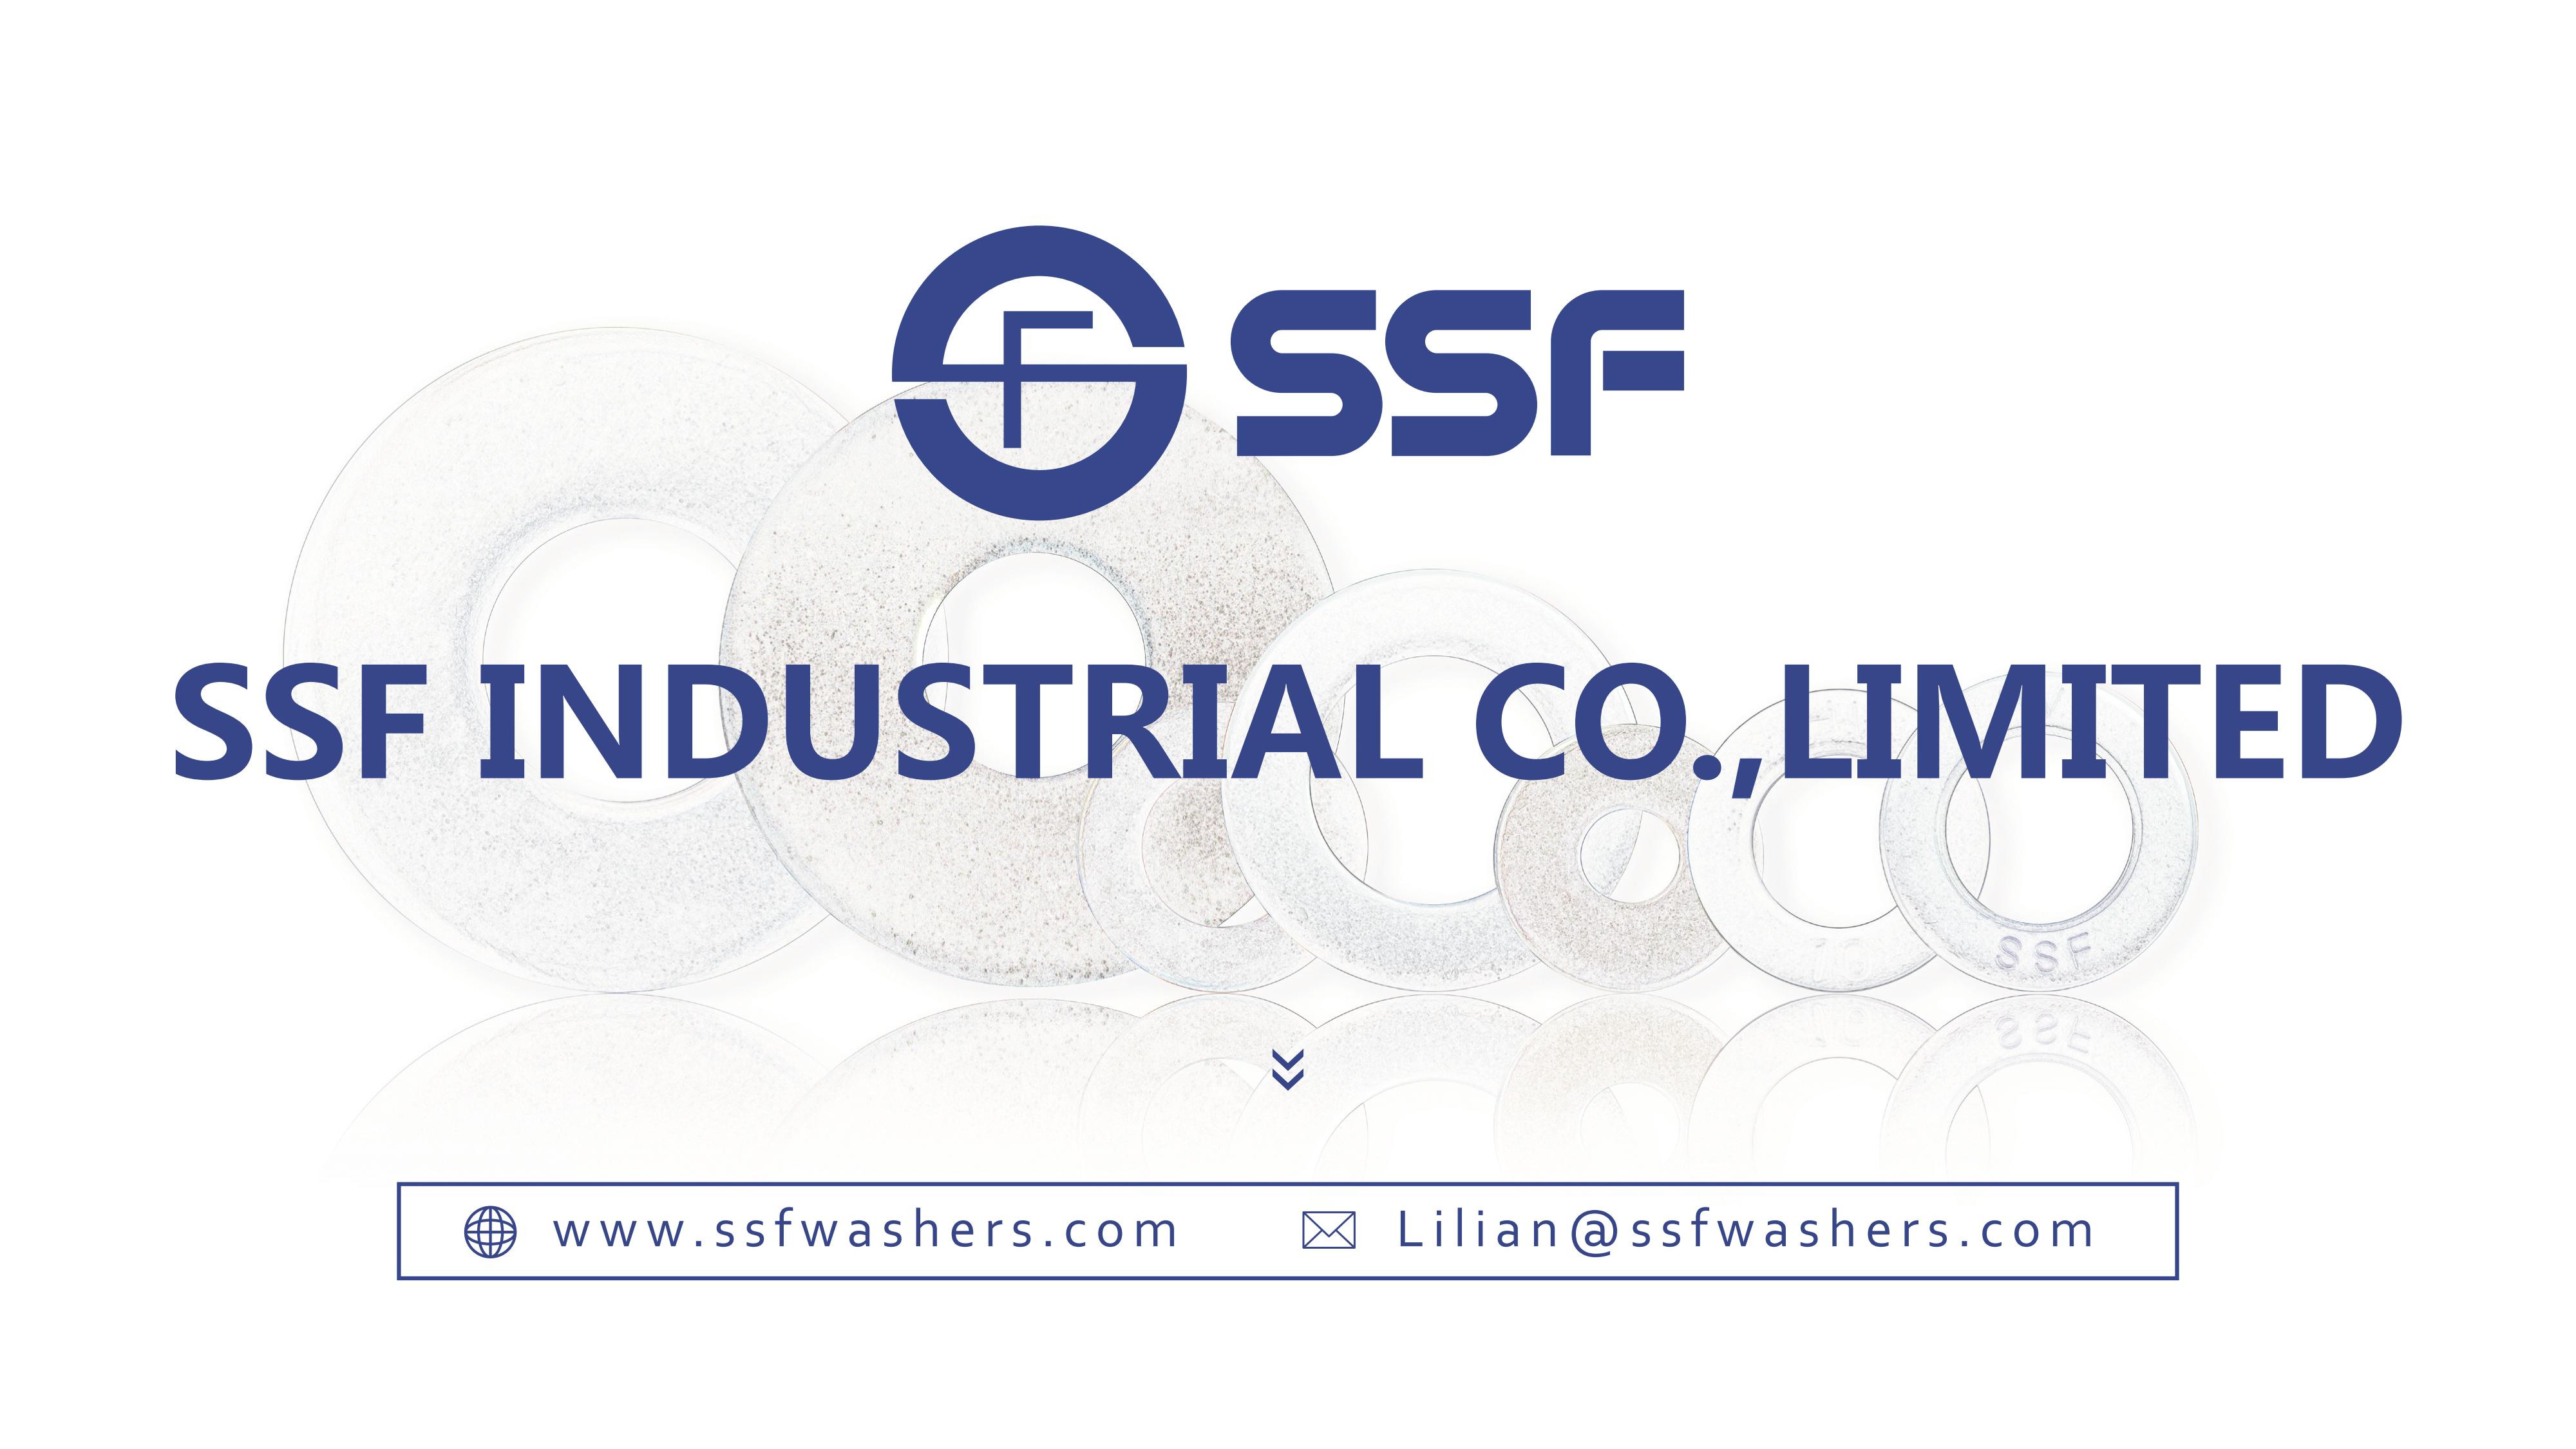 SSF INDUSTRIAL CO., LIMITED_Online Catalogues